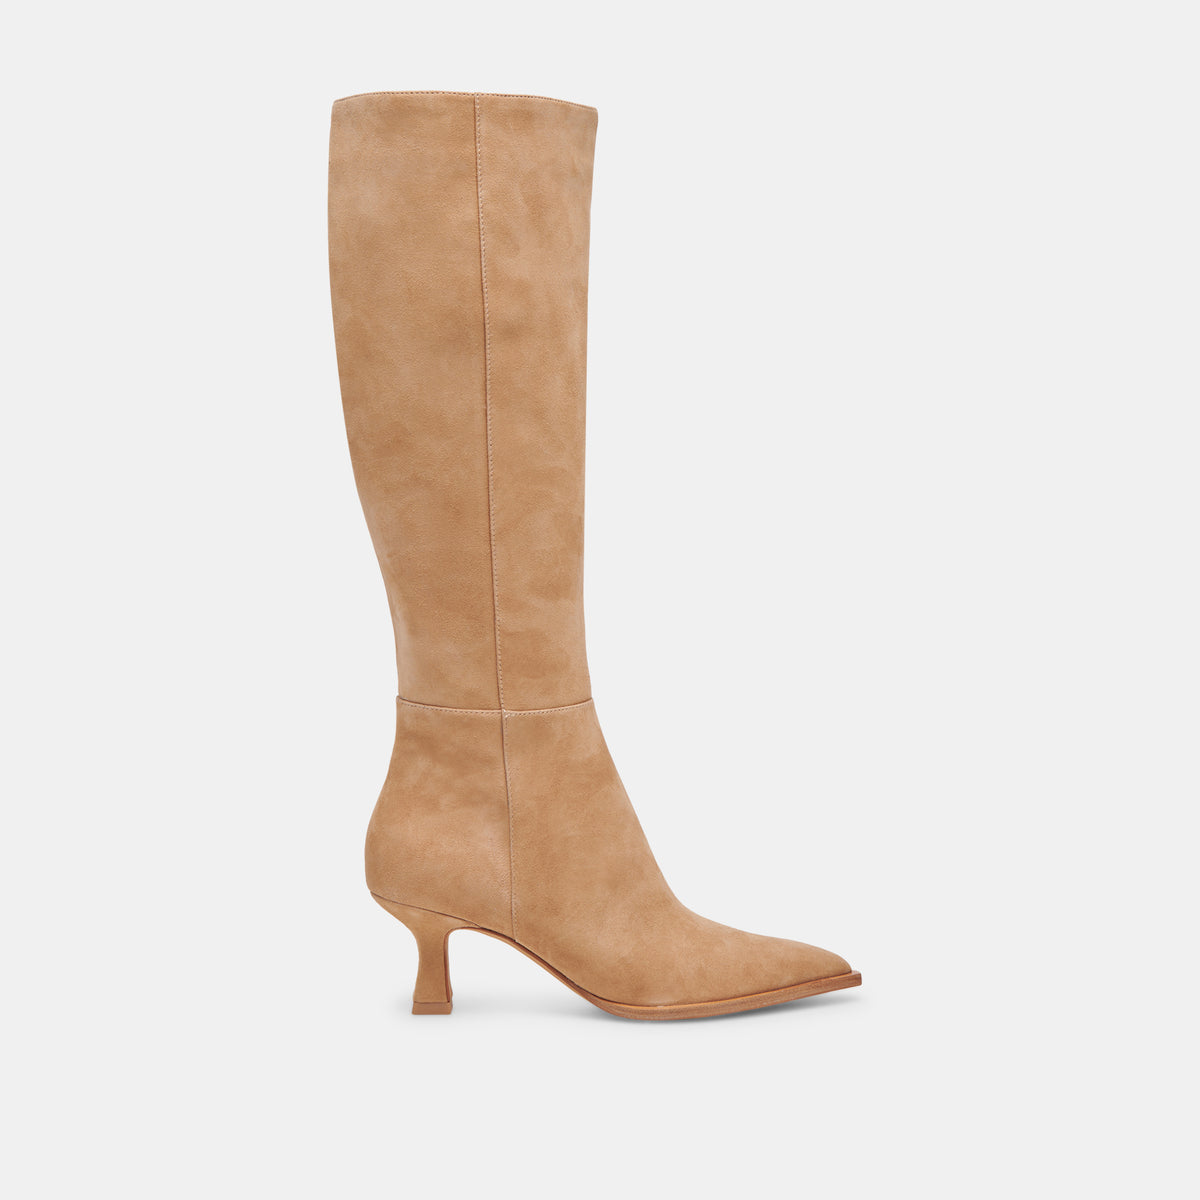 AUGGIE Boots Camel Suede | Women's Camel Suede Knee-High Boots – Dolce Vita